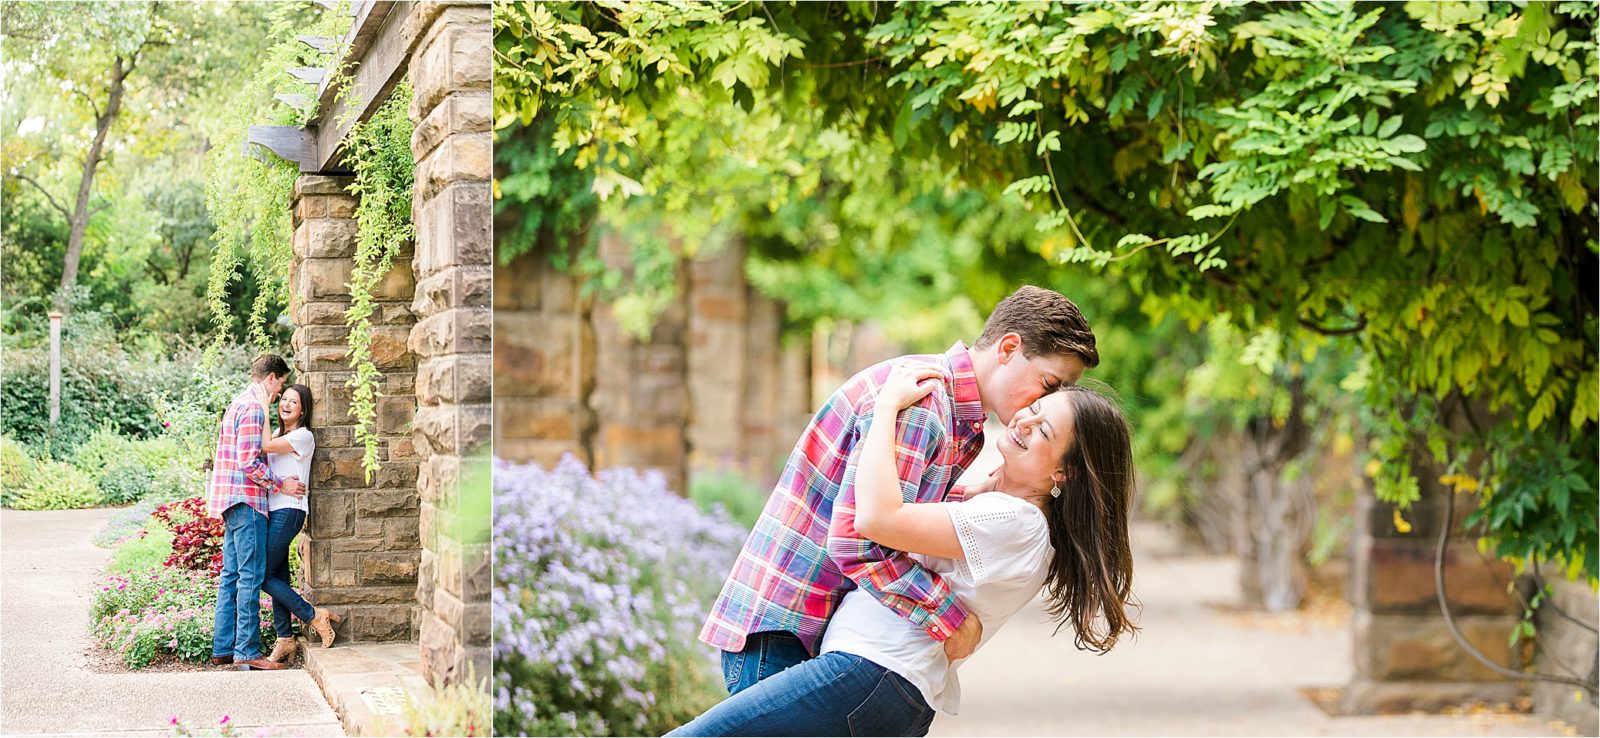 A couple dips under some lush ivy during their engagement session at The Botanic Gardens in Fort Worth, Texas 